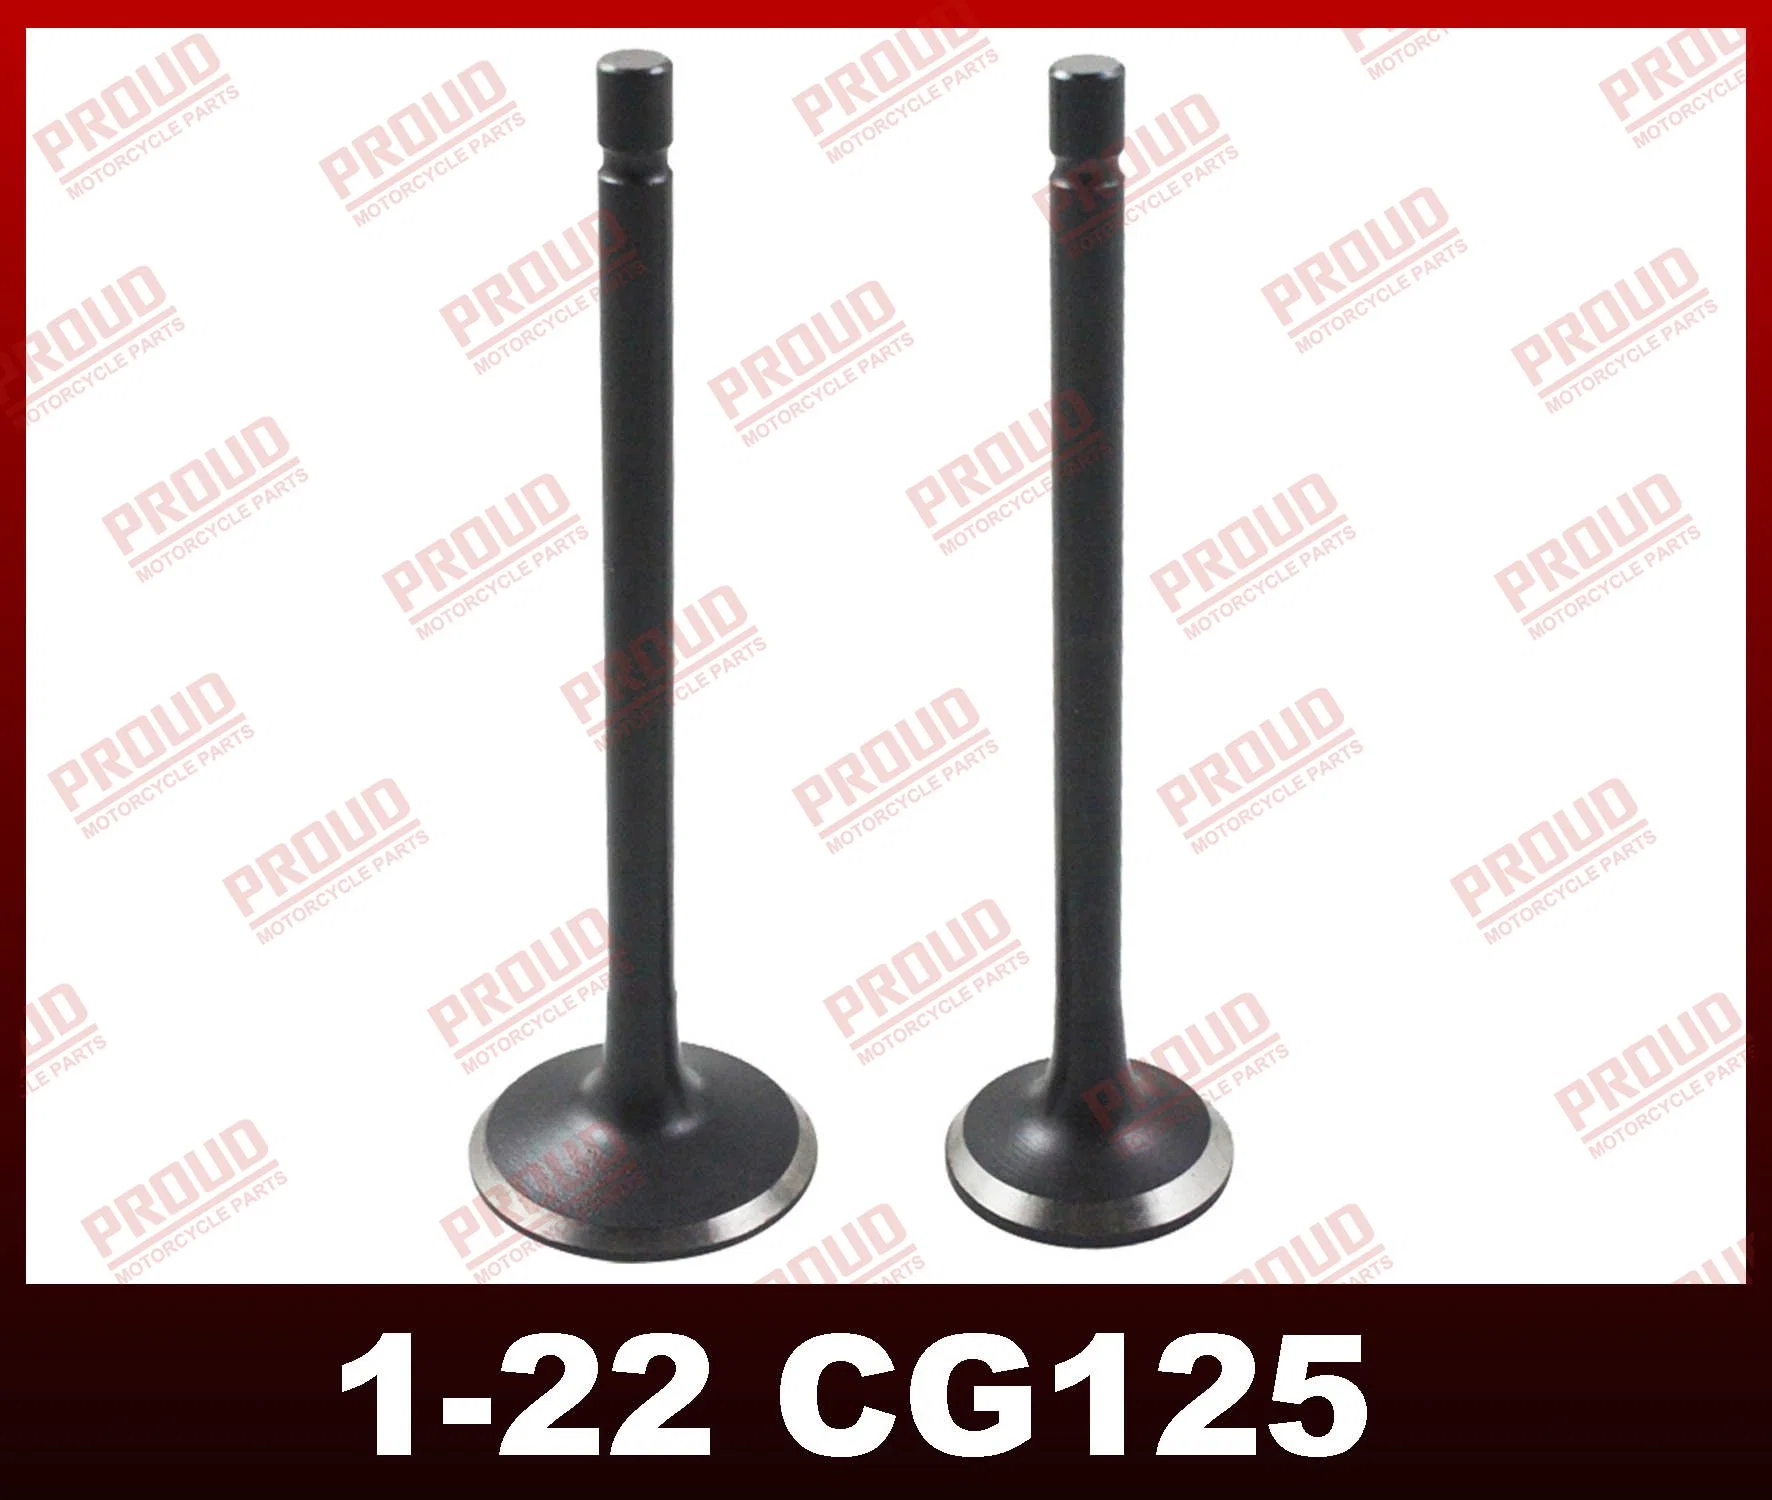 Motorcycle Engine Valve High Quality Cg125/150/200 Motorcycle Parts